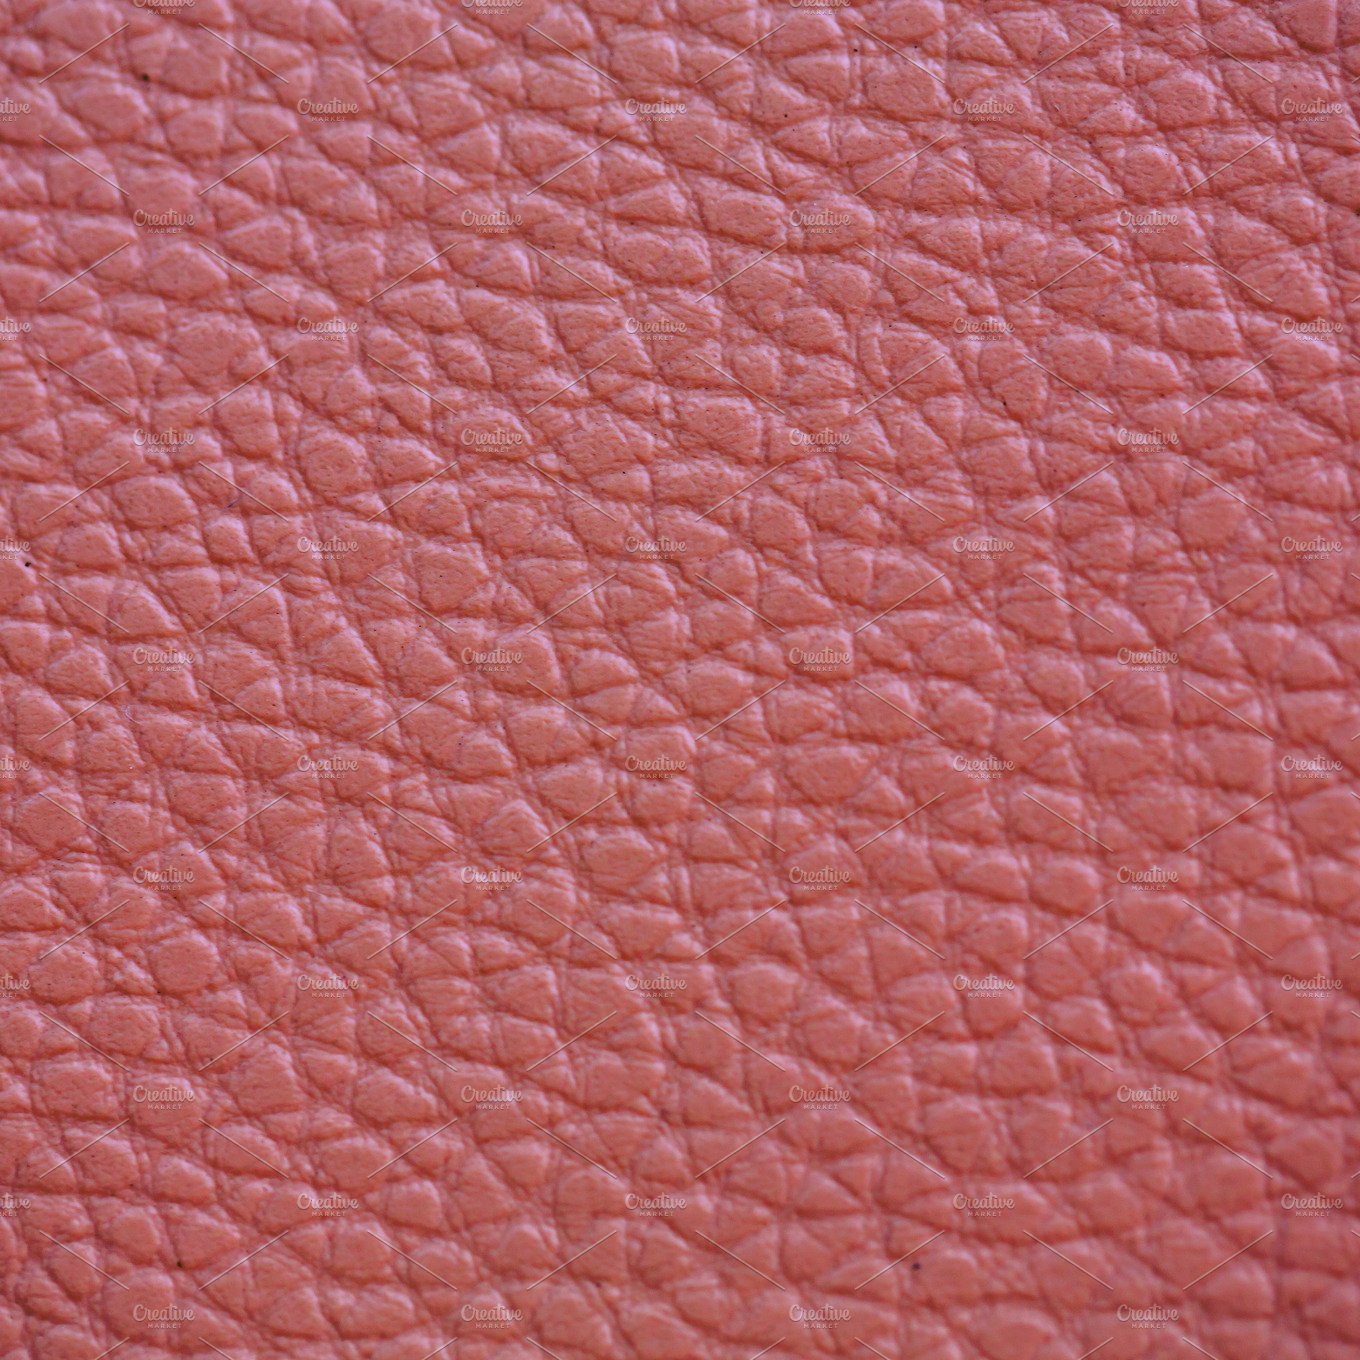 Leather cover image.